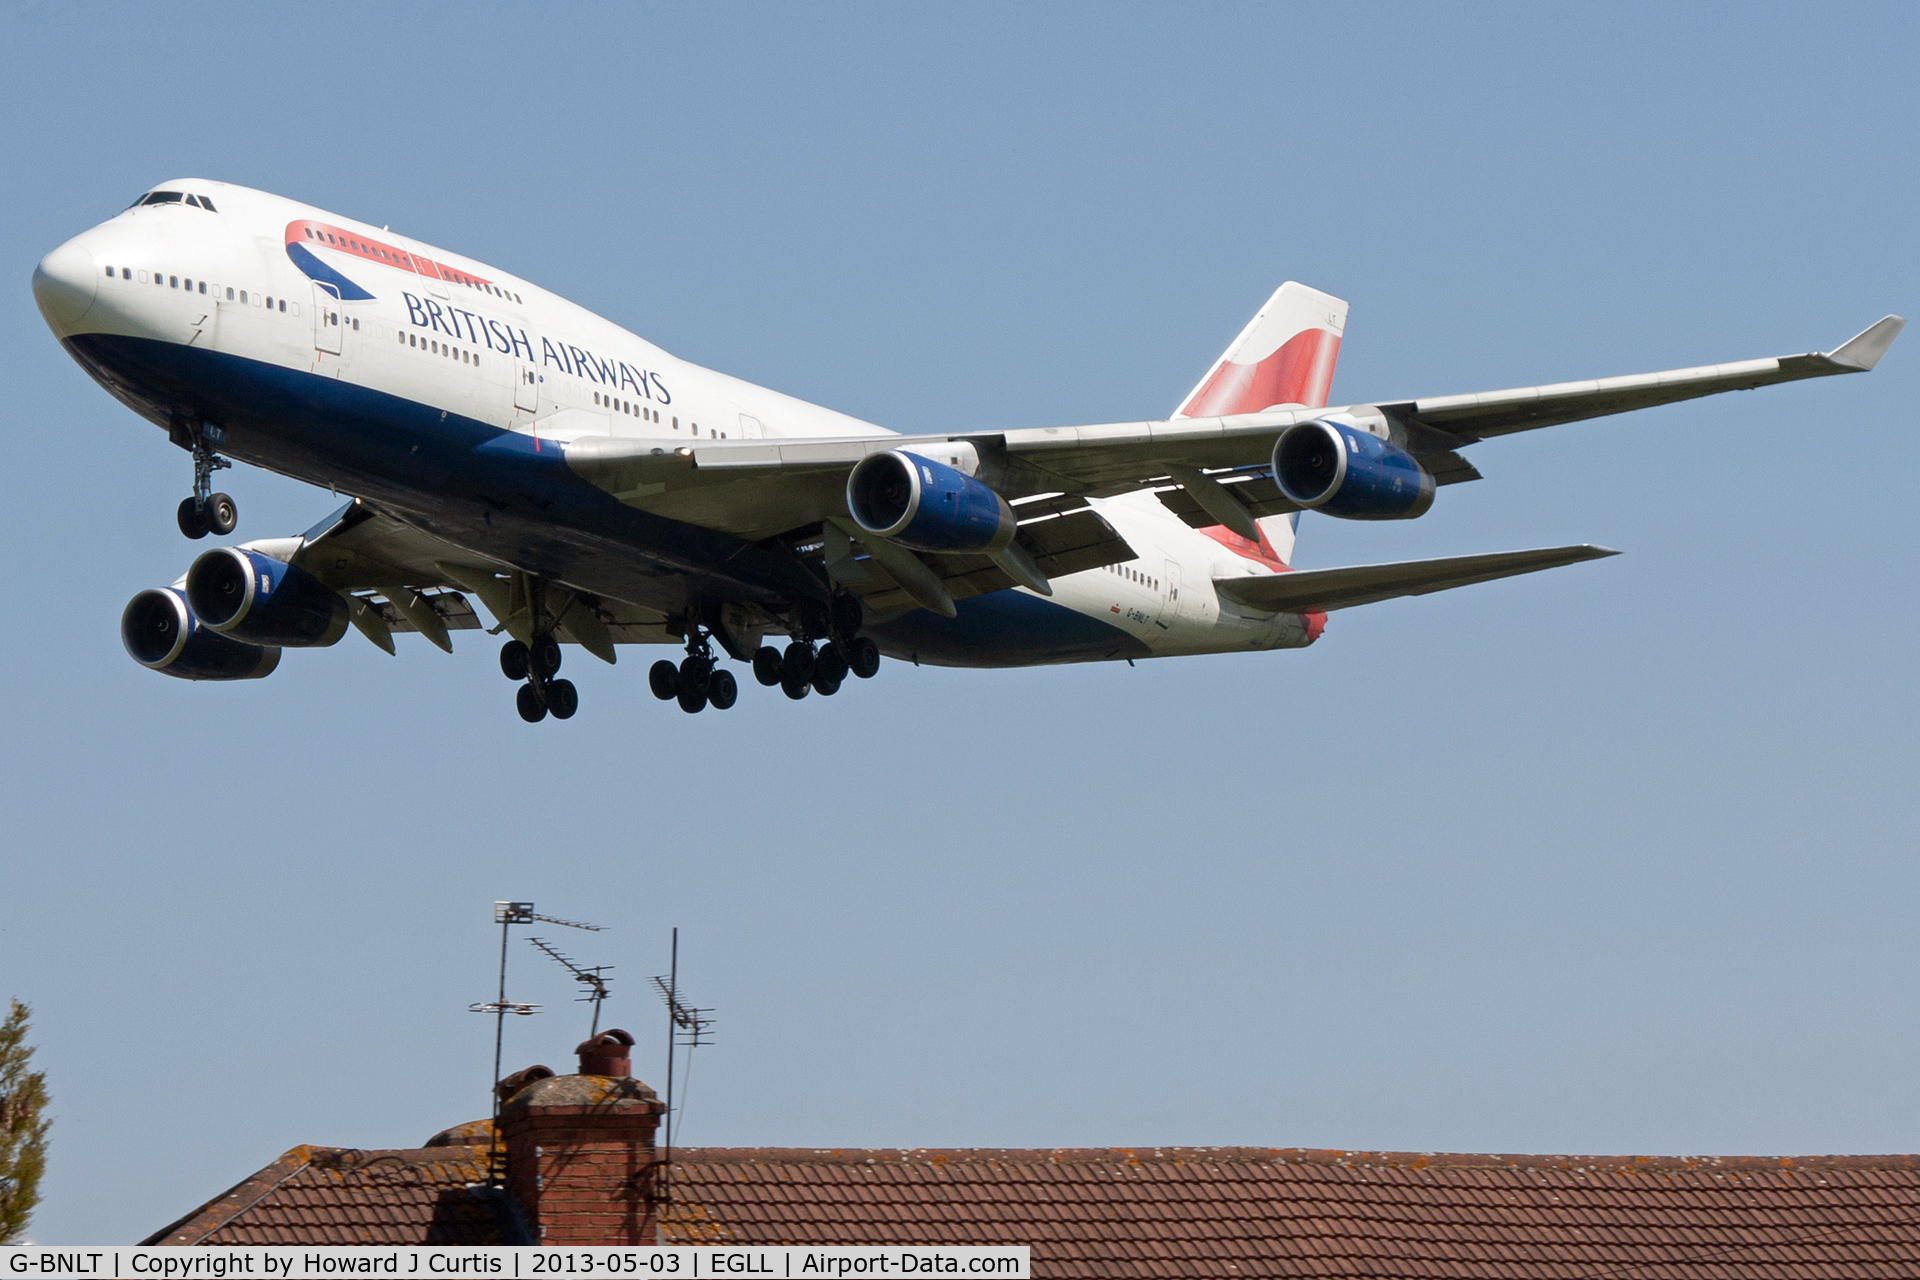 G-BNLT, 1991 Boeing 747-436 C/N 24630, British Airways, on approach to runway 27L, coming over Mrytle Avenue.